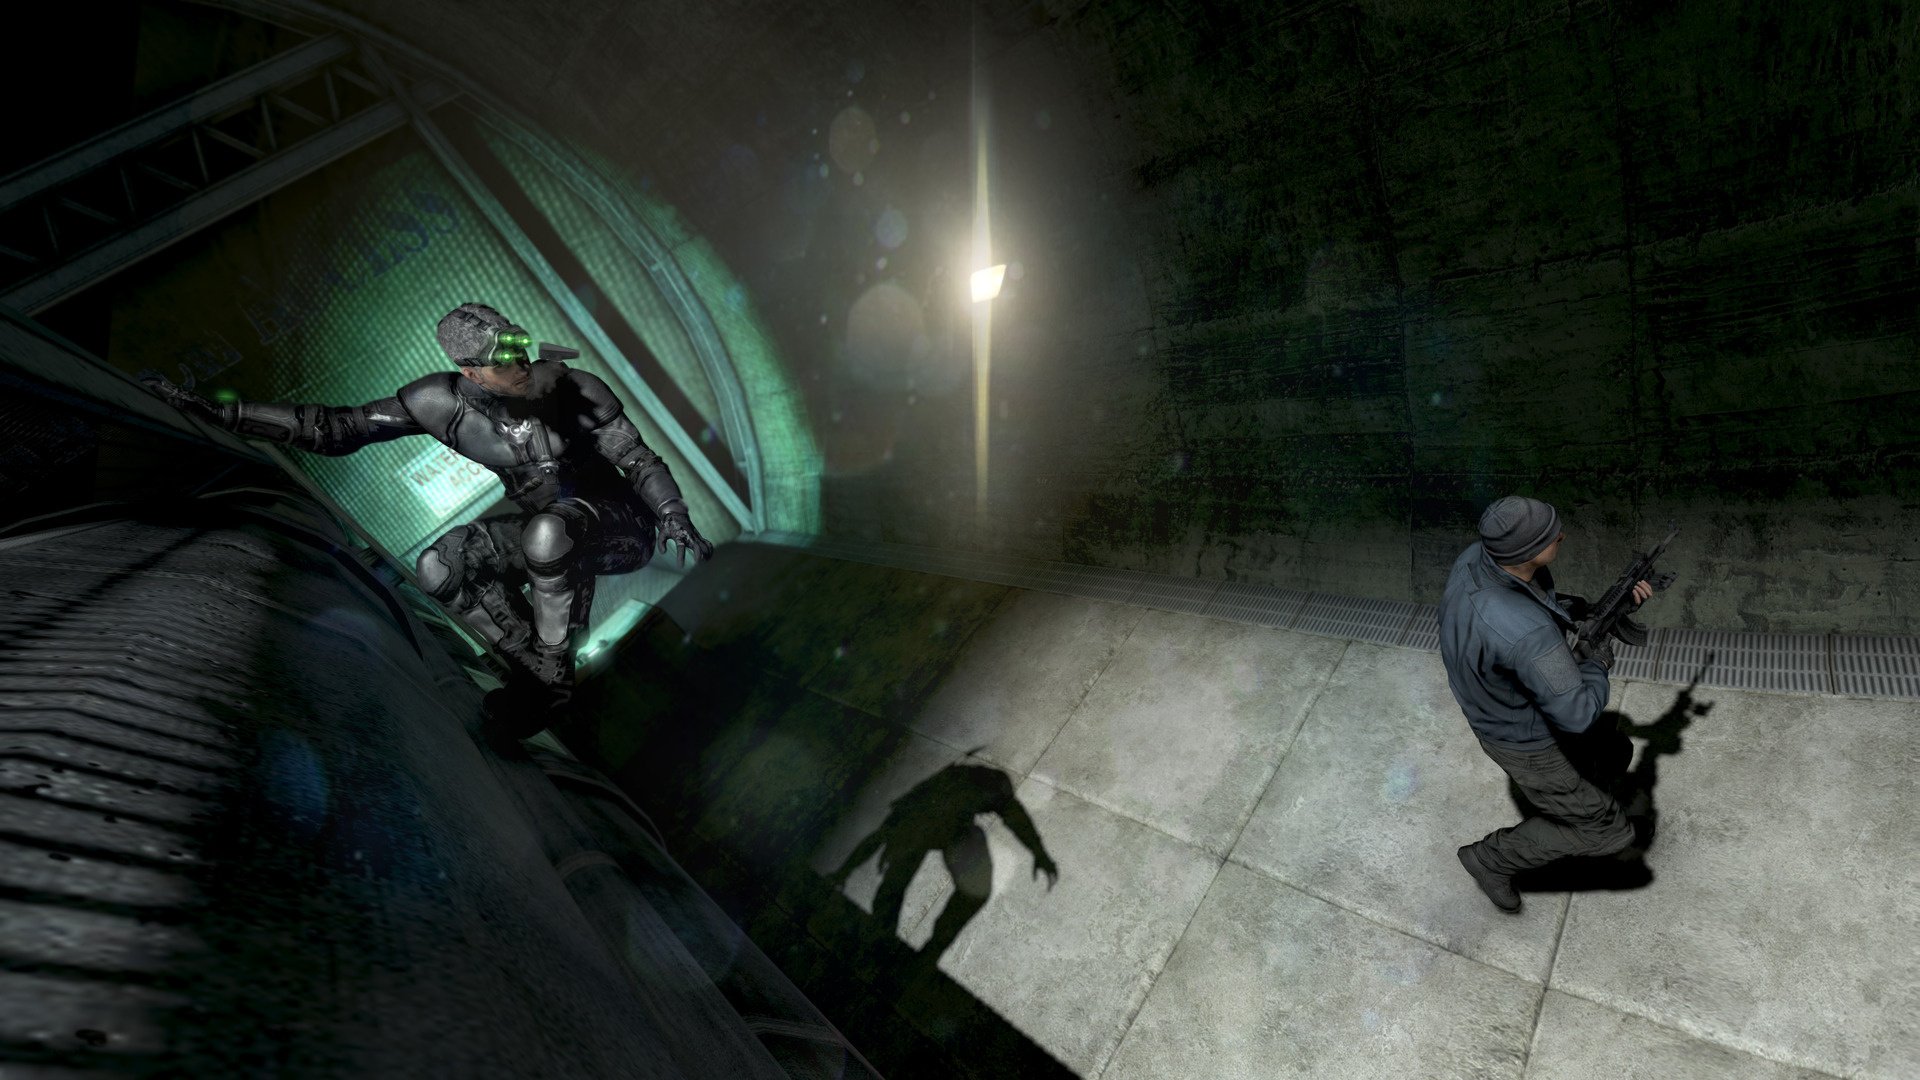 Splinter Cell Conviction for iPhone- app review